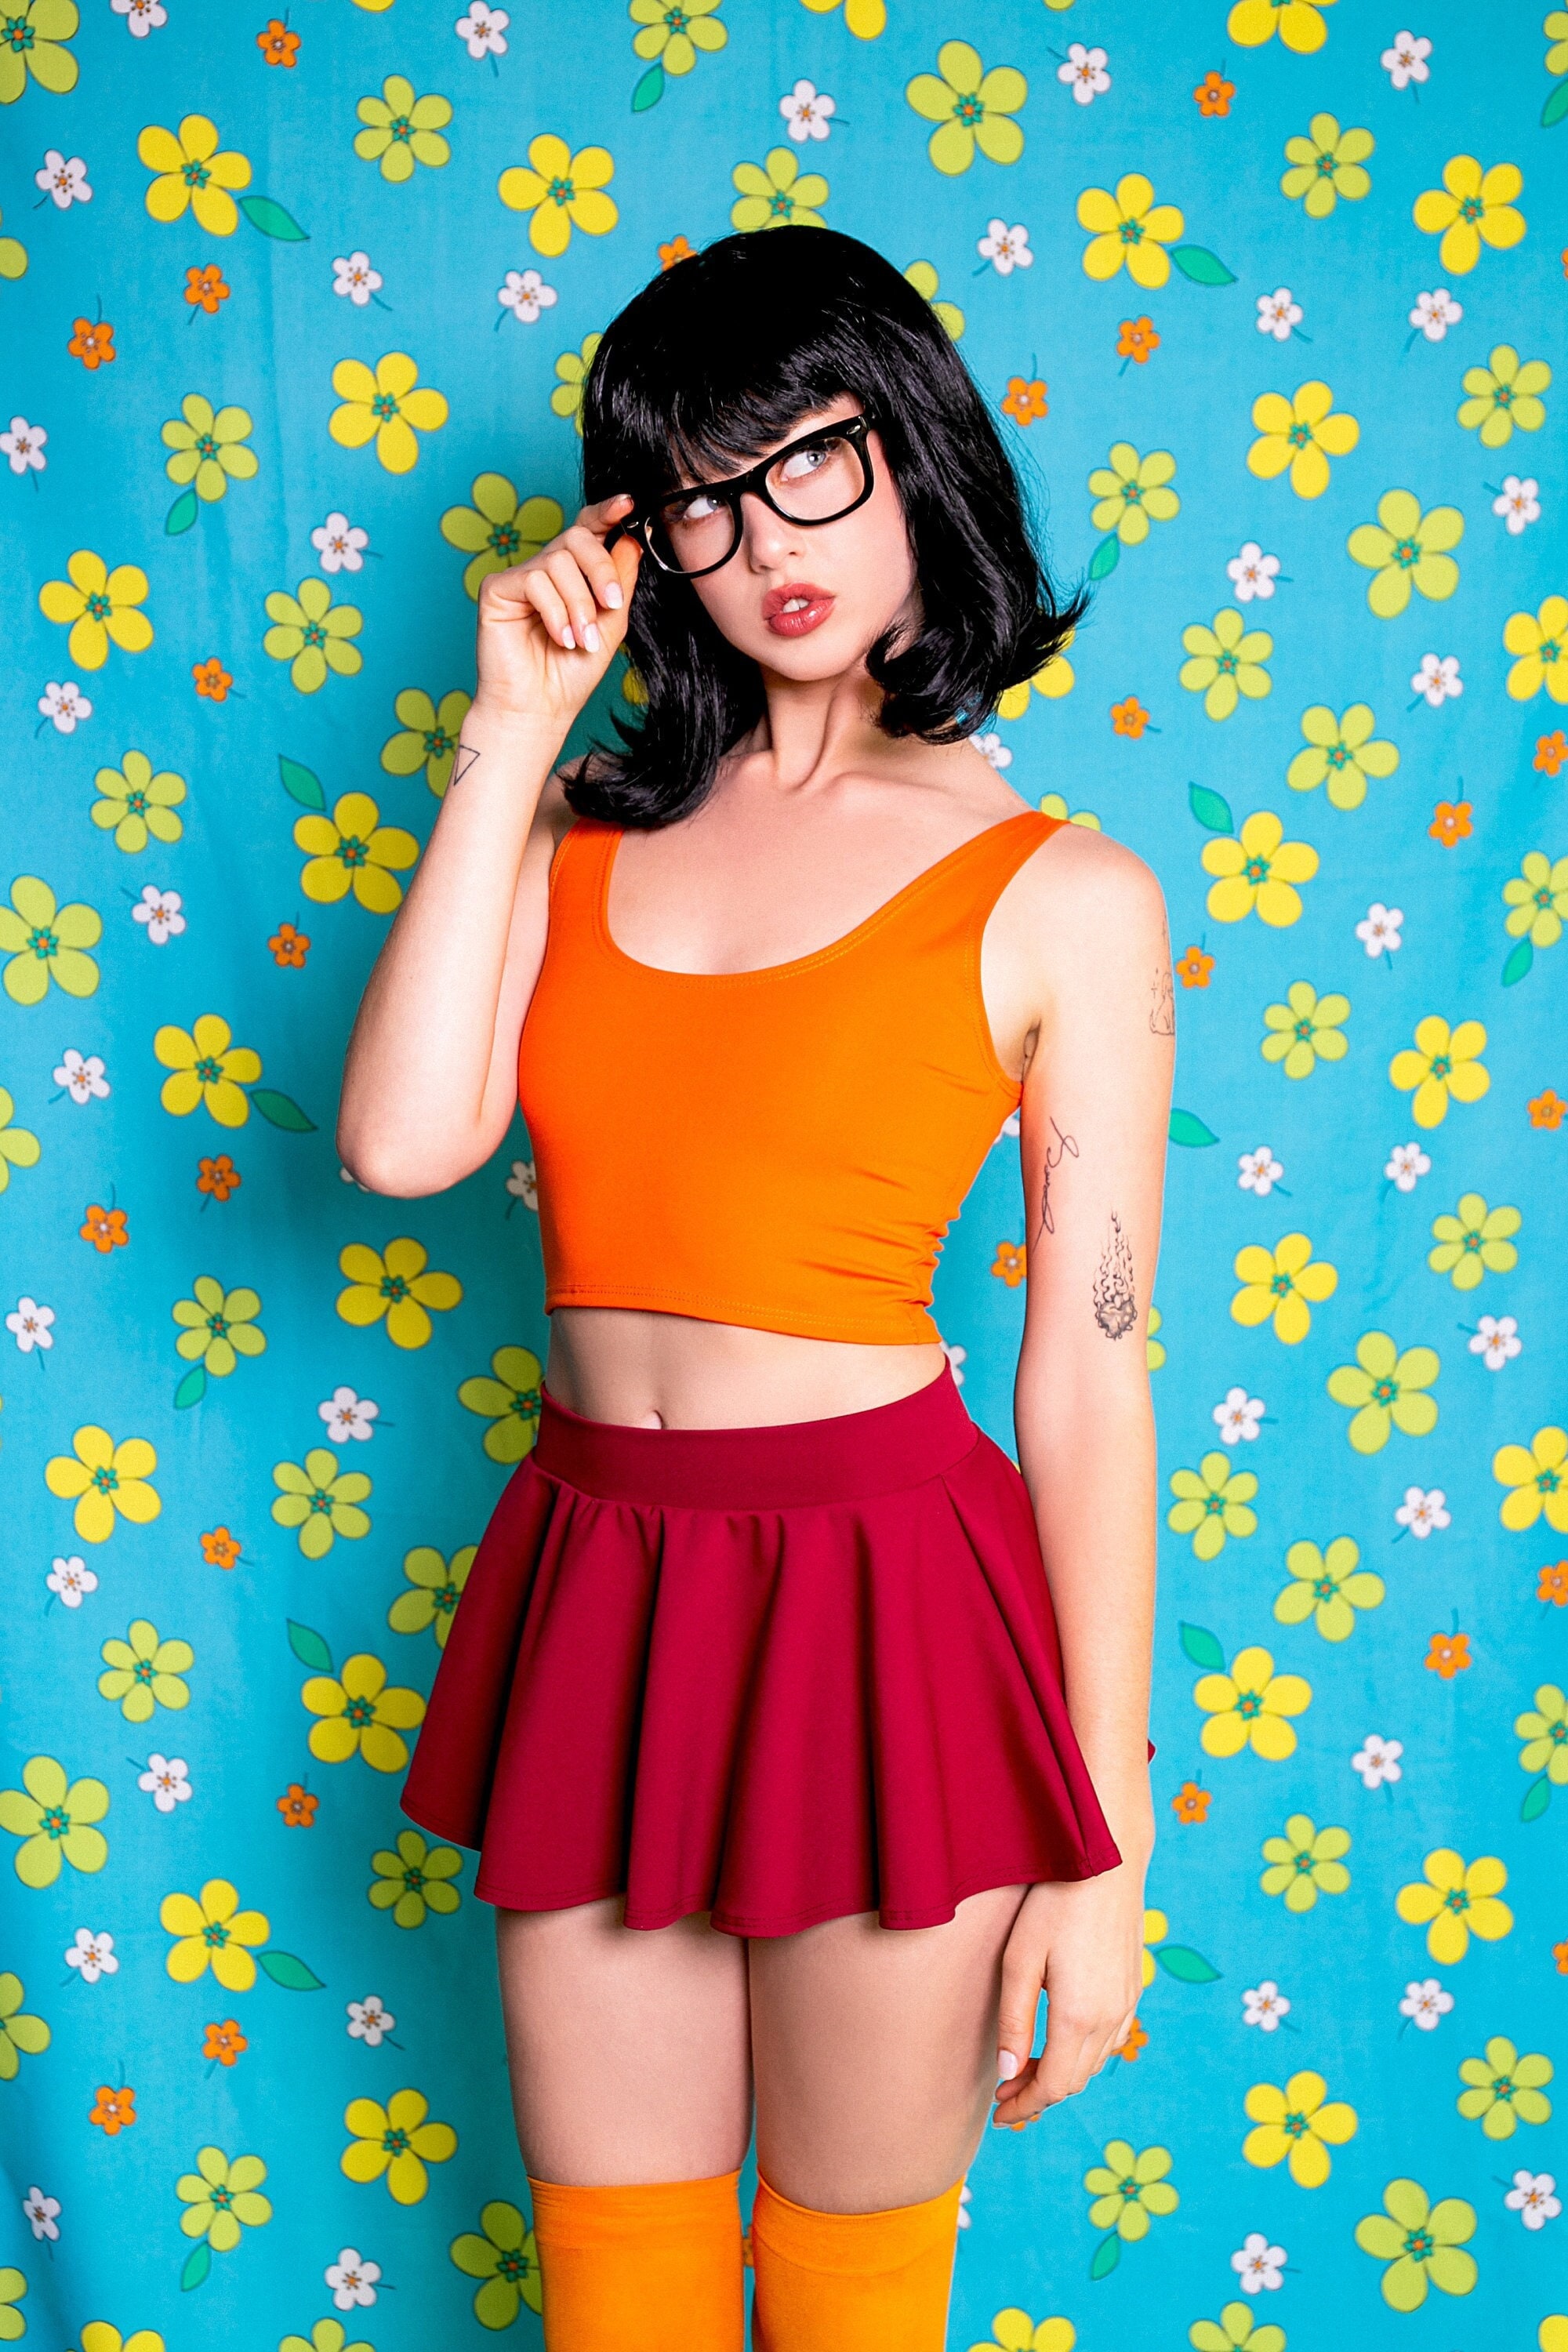 Velma Dinkley Scooby Doo Cosplay Costume Ready to Ship 